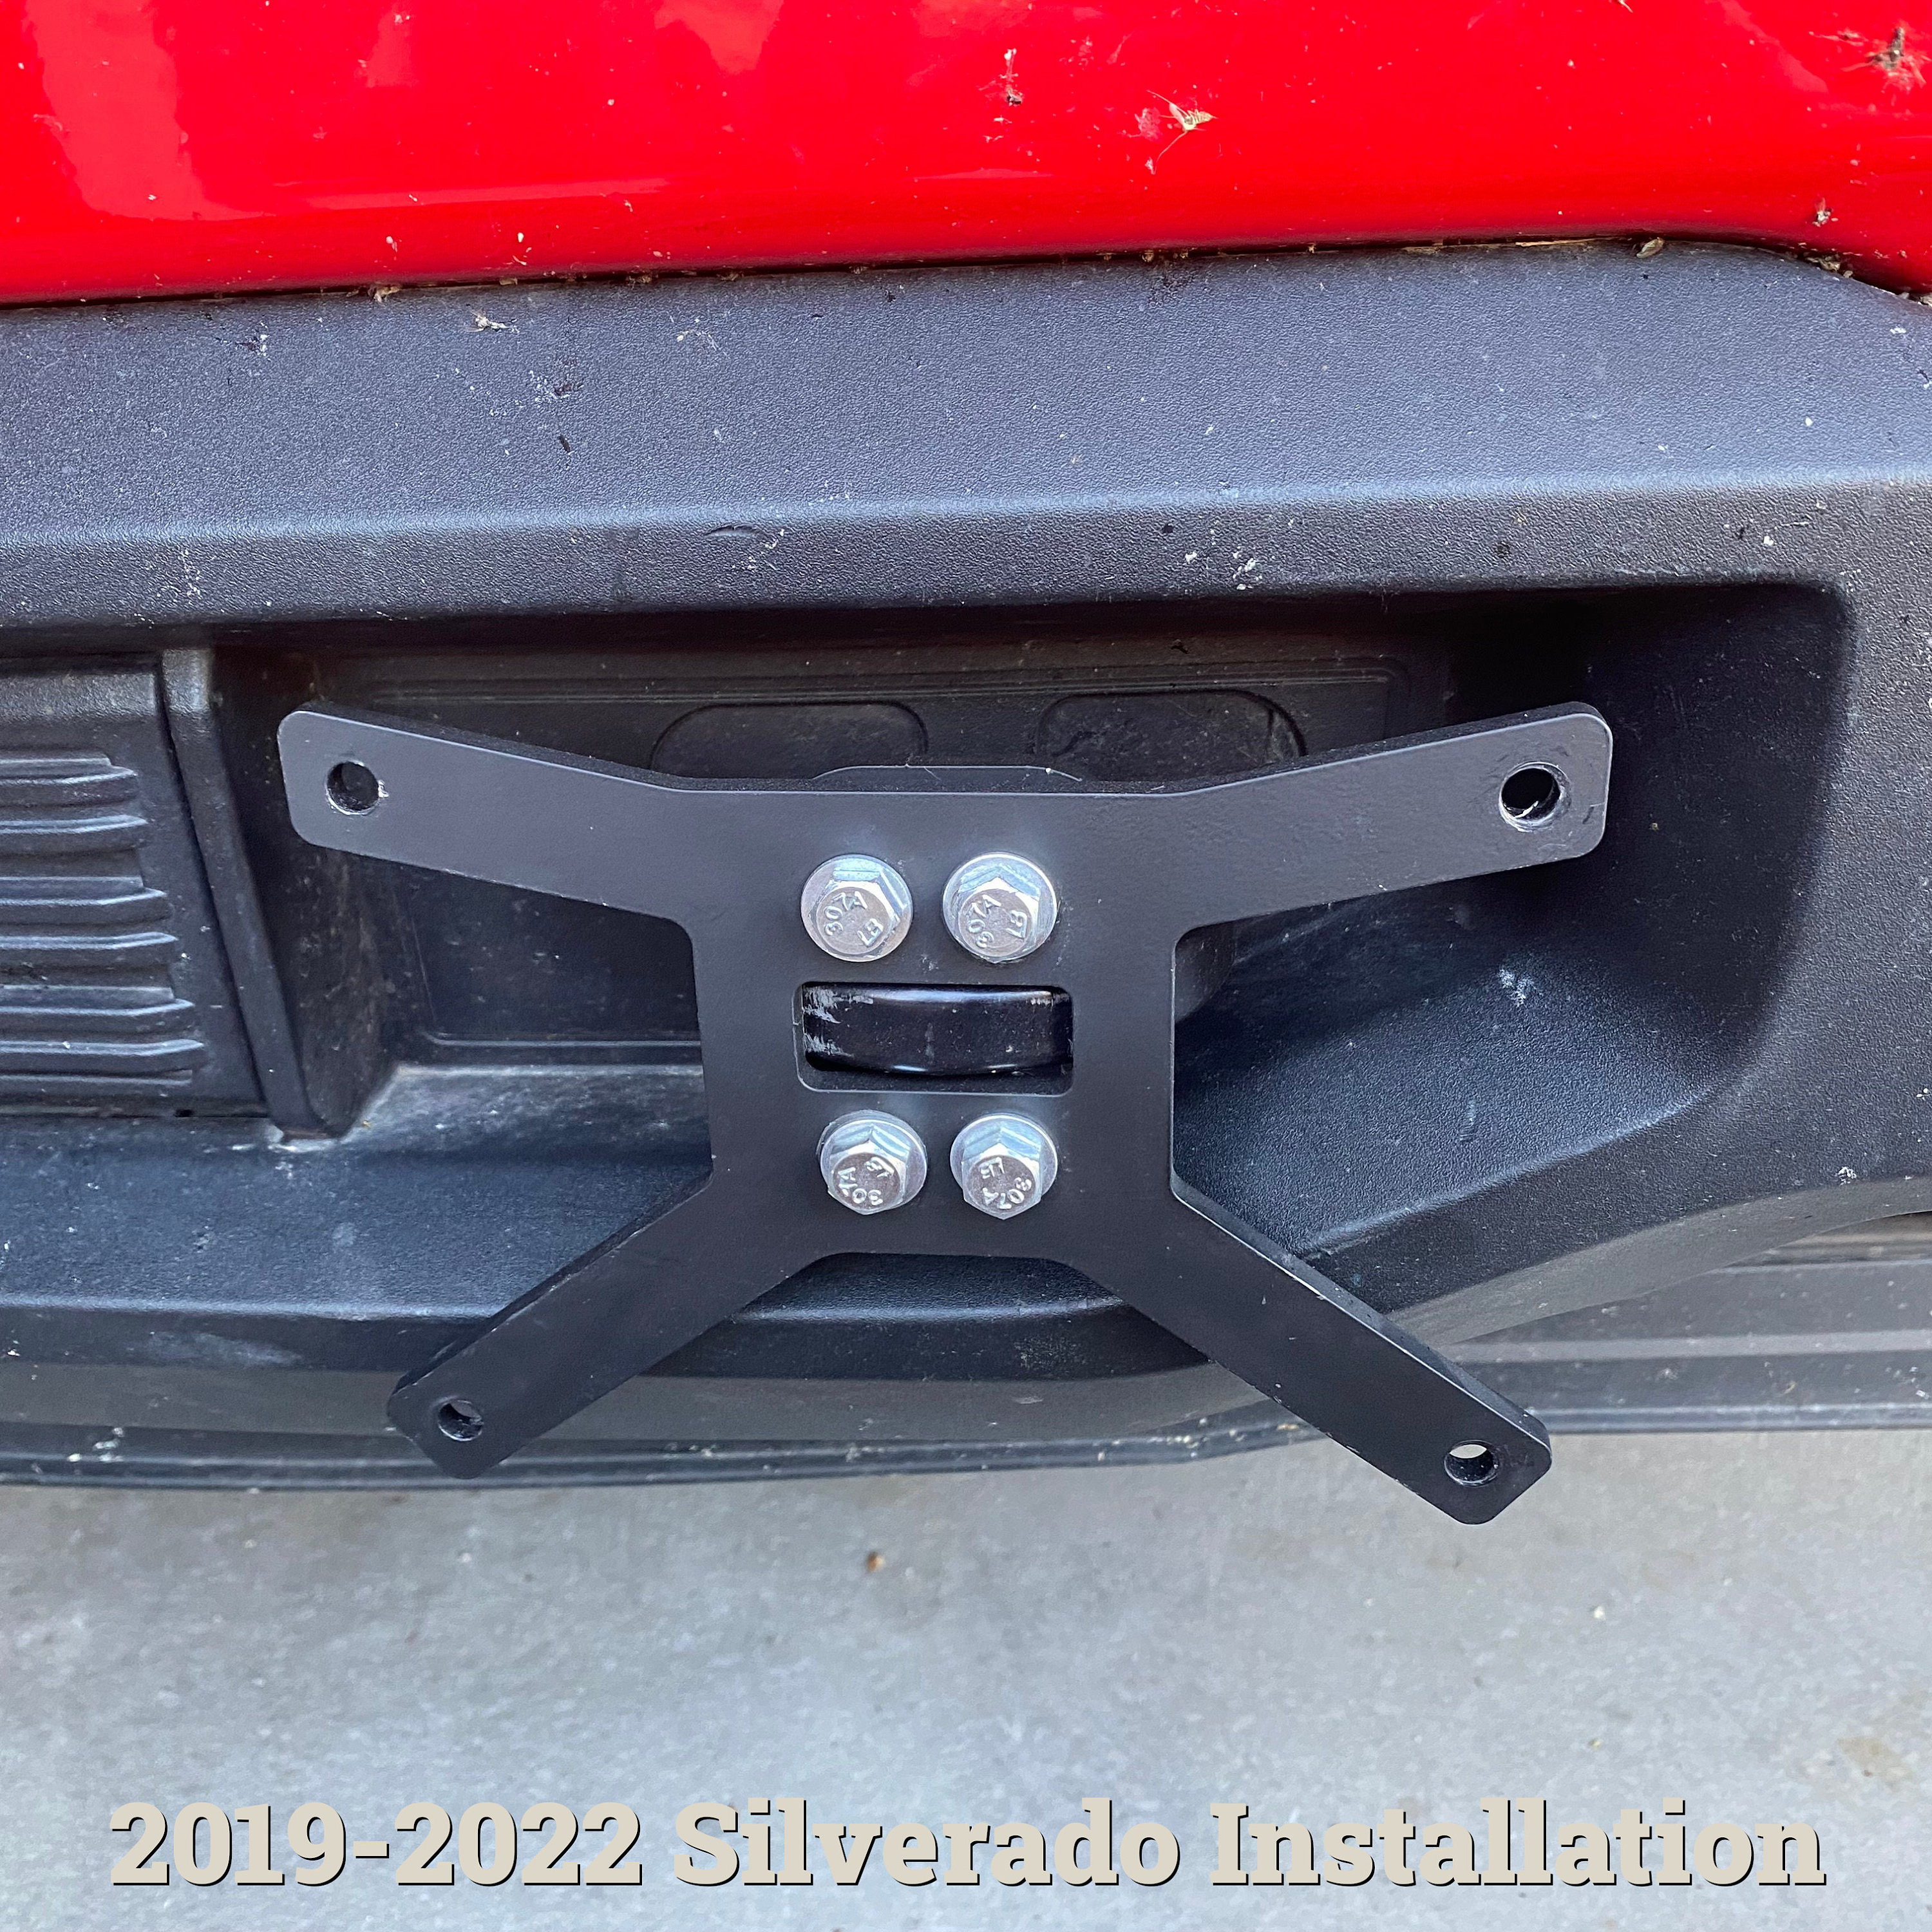 2014 Silverado Tow Hook License Plate Relocation Bracket, Offset License  Plate, for 2014 Chevy Silverado With OEM Tow Hooks in Bumper 